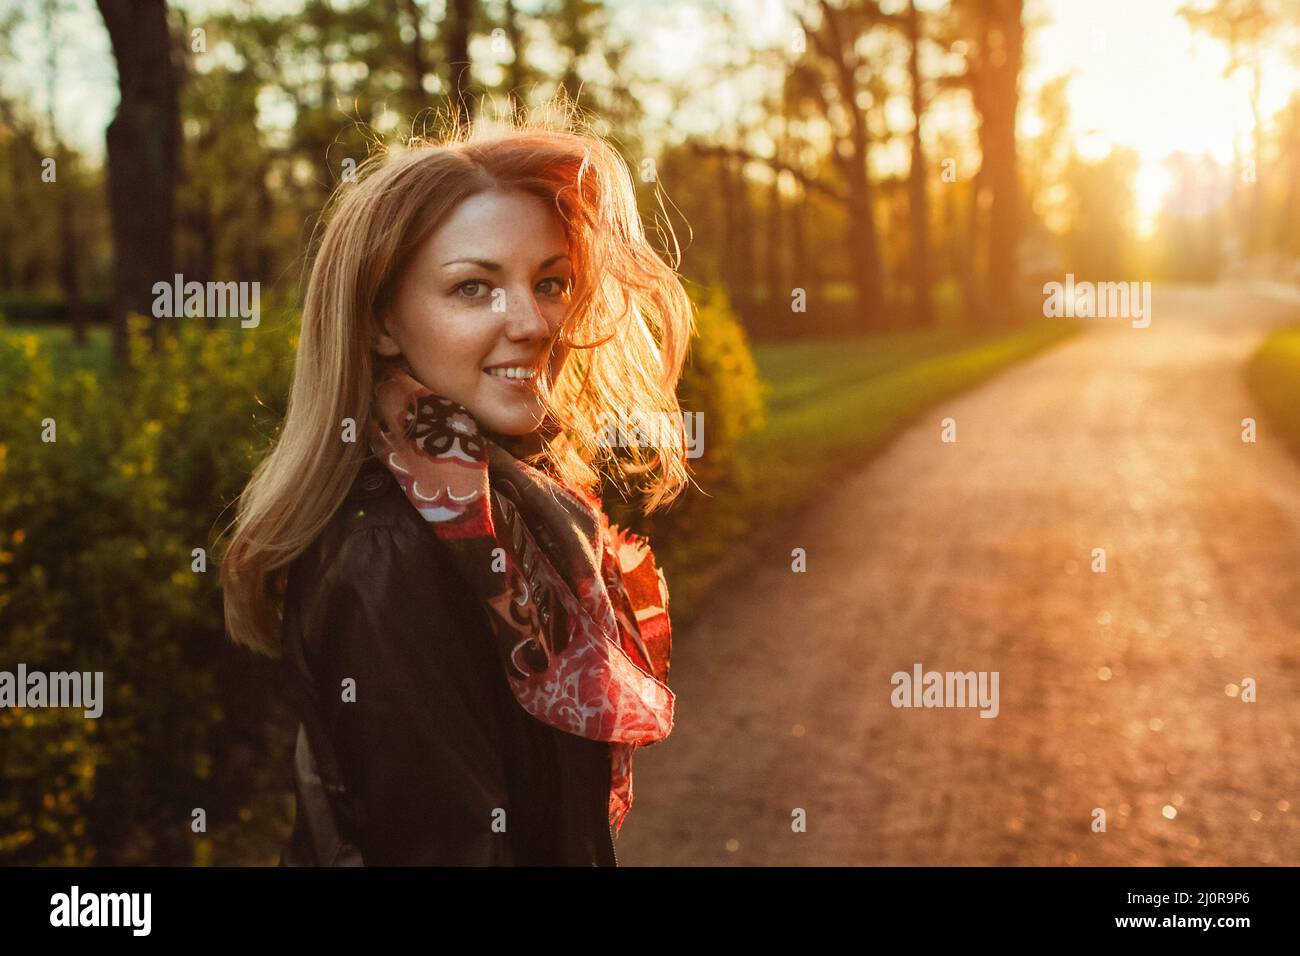 Young smiling woman with waving hair on park road at sunset. Girl walking in evening forest. Stock Photo